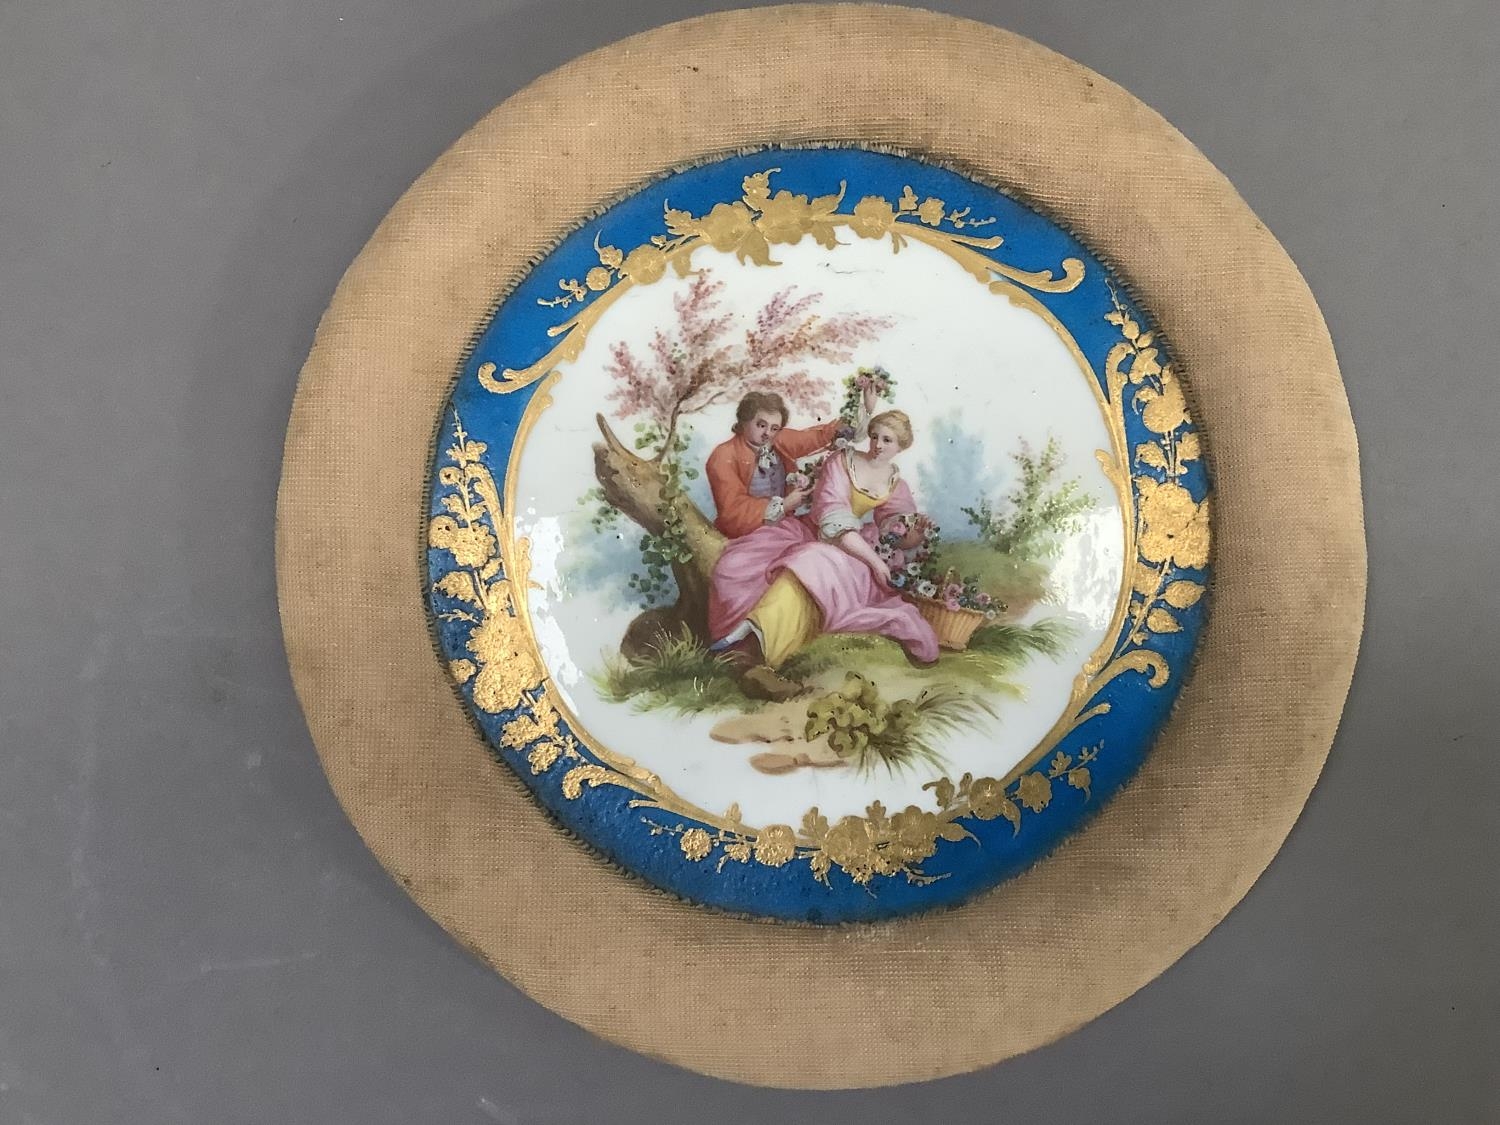 A Sevres style porcelain plaque, painted with a romantic scene of a lovers in a landscape within a